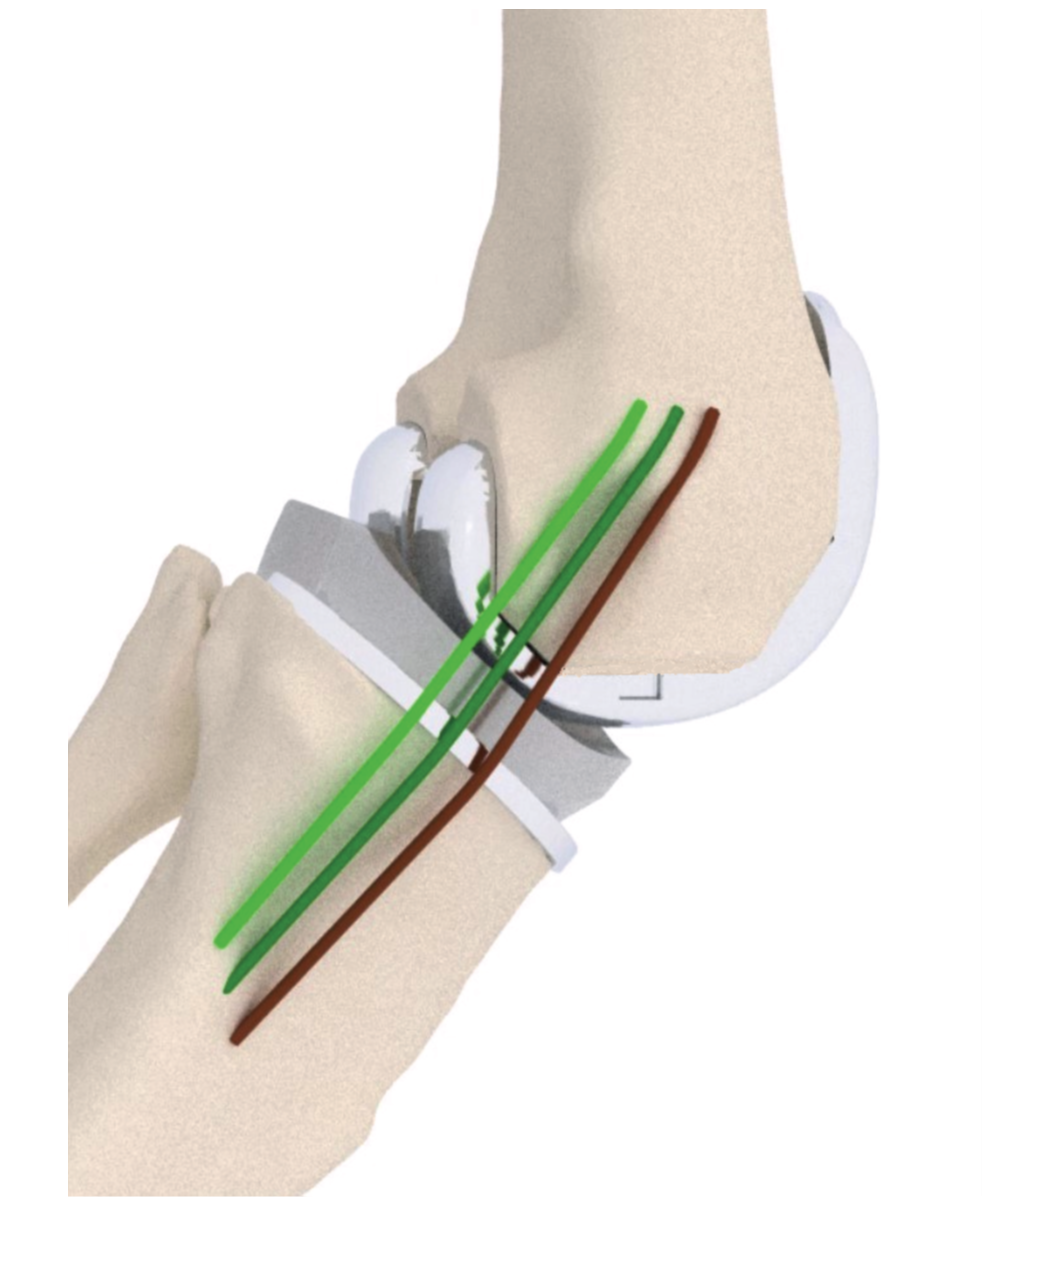 Enlarged view: Ligament Strain